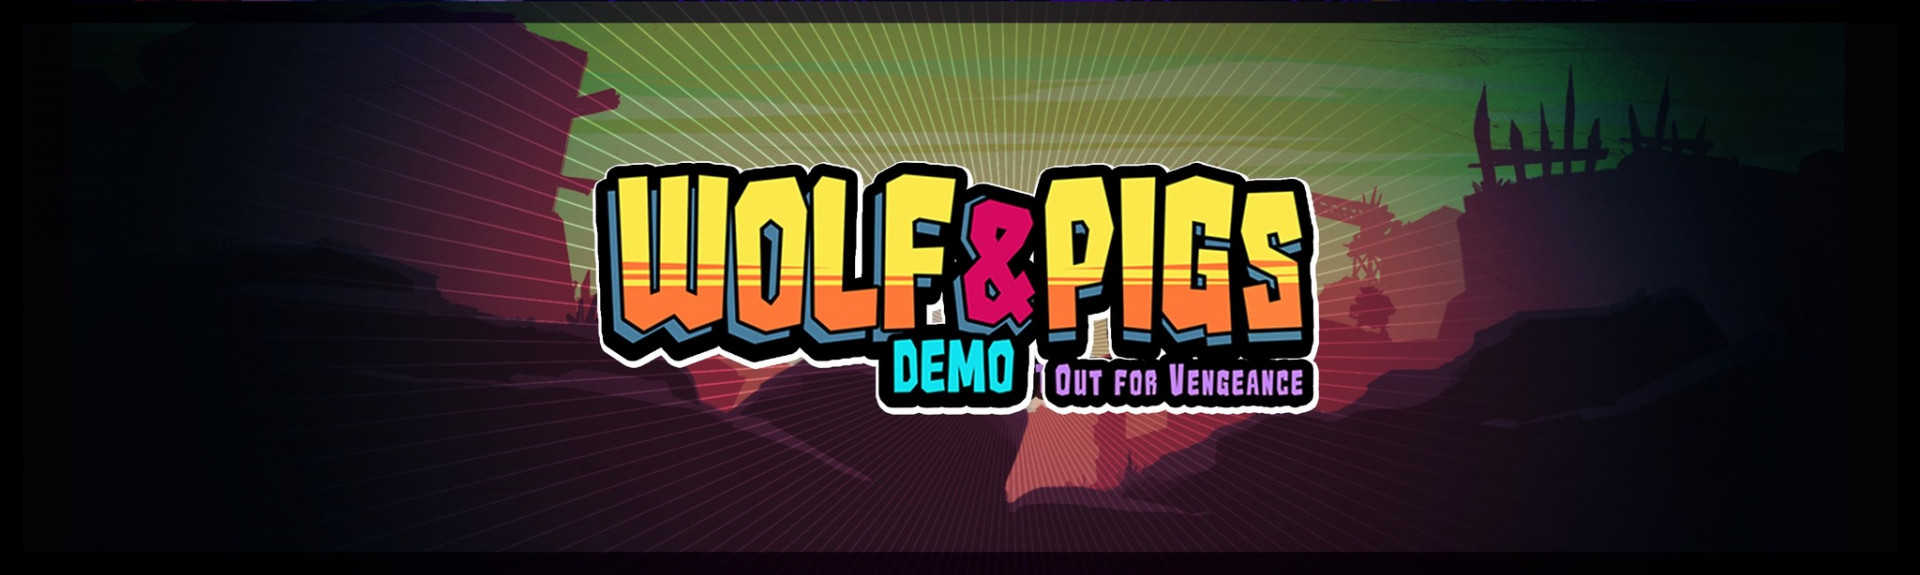 Wolf and Pigs Demo